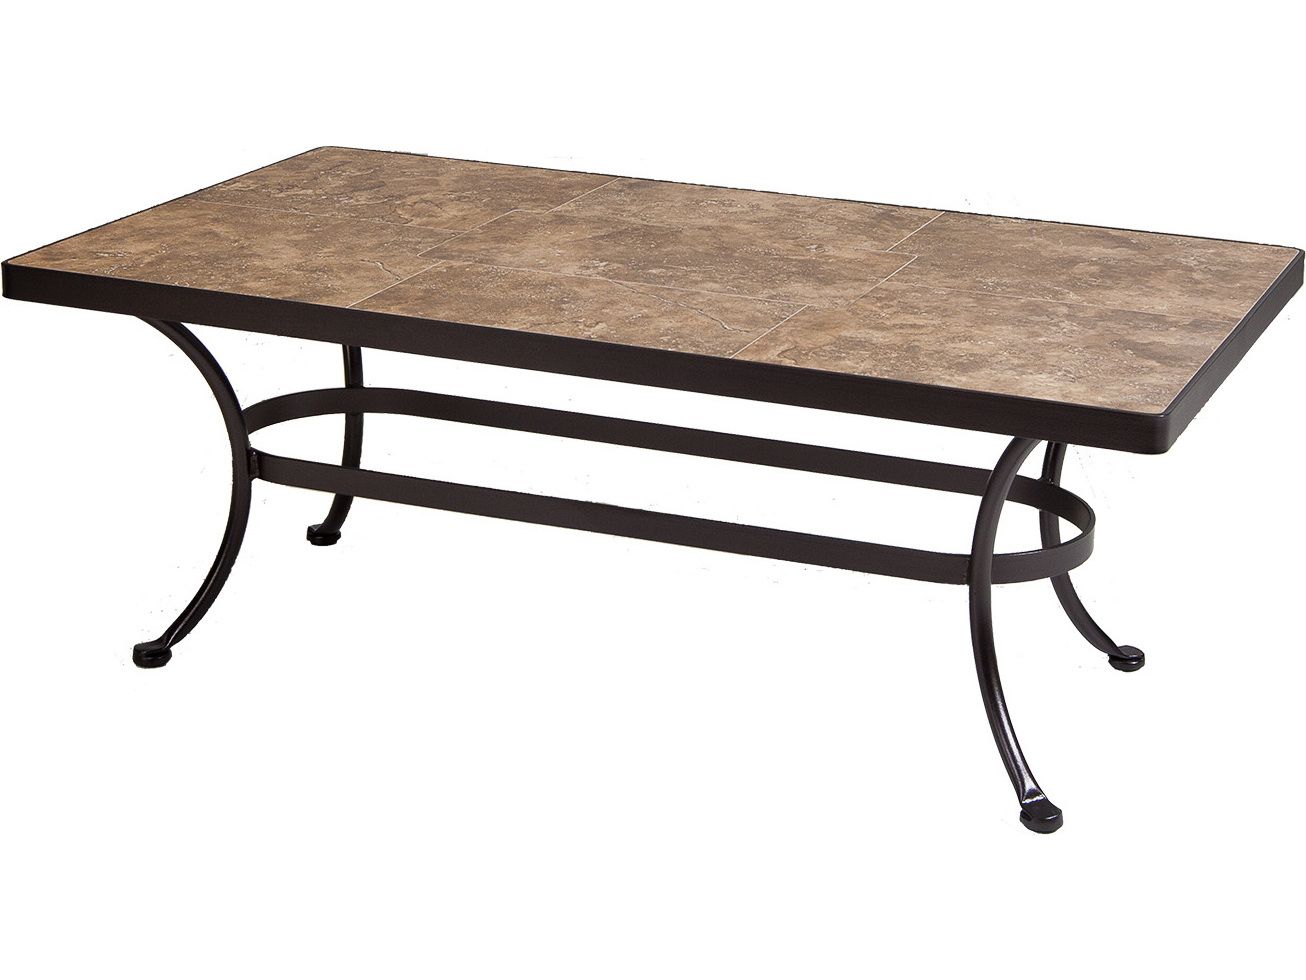 Ow Lee Wrought Iron Rectangular Coffee Table Base 43w X 20''d X 17.5h In Rectangular Coffee Tables With Pedestal Bases (Photo 8 of 15)